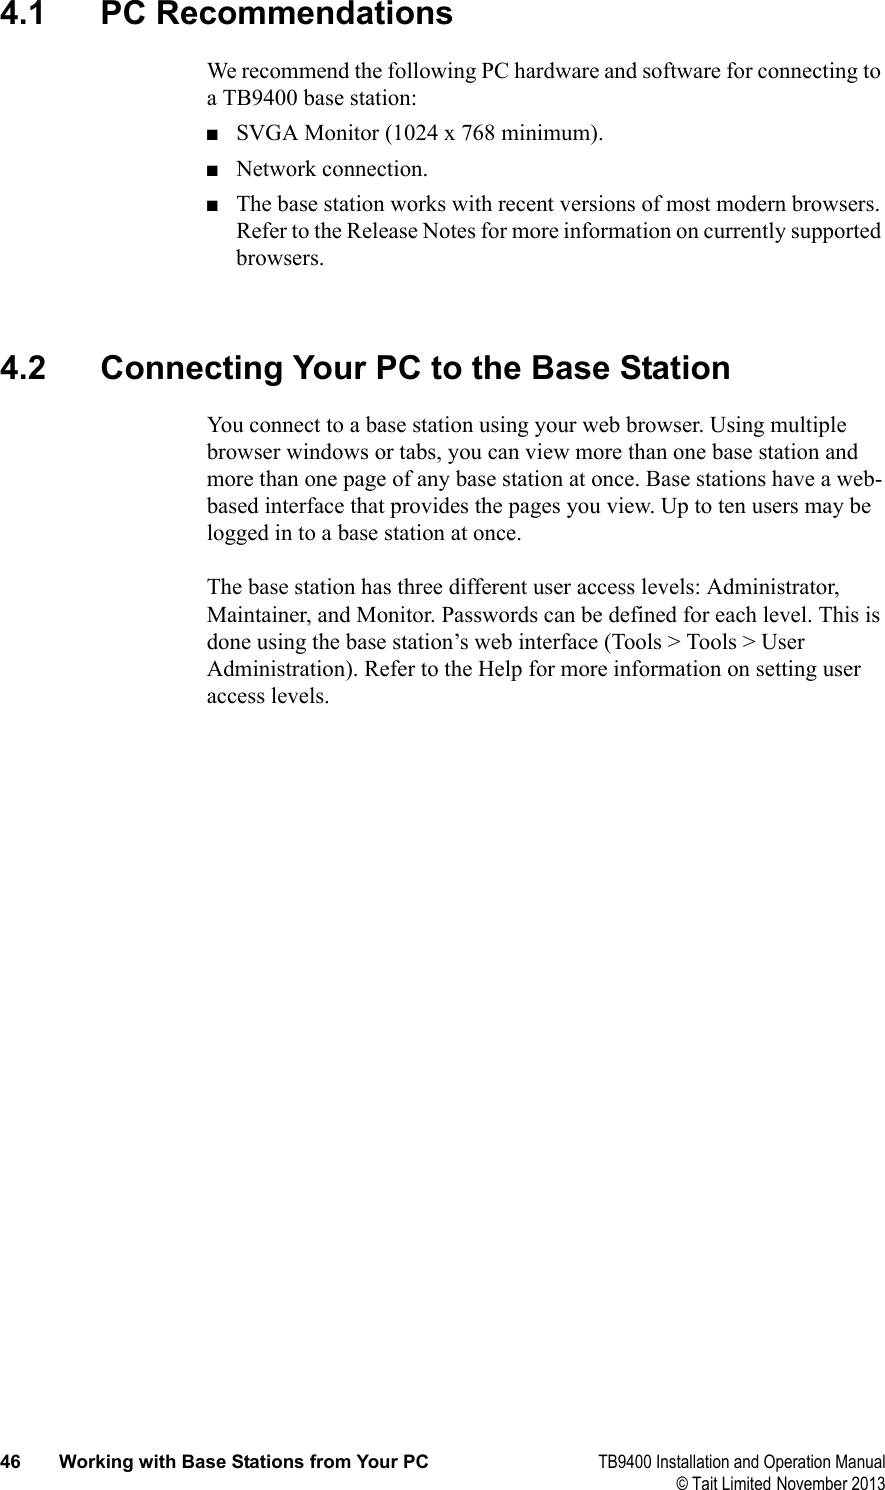  46 Working with Base Stations from Your PC TB9400 Installation and Operation Manual© Tait Limited November 20134.1 PC RecommendationsWe recommend the following PC hardware and software for connecting to a TB9400 base station:■SVGA Monitor (1024 x 768 minimum).■Network connection.■The base station works with recent versions of most modern browsers. Refer to the Release Notes for more information on currently supported browsers. 4.2 Connecting Your PC to the Base StationYou connect to a base station using your web browser. Using multiple browser windows or tabs, you can view more than one base station and more than one page of any base station at once. Base stations have a web-based interface that provides the pages you view. Up to ten users may be logged in to a base station at once.The base station has three different user access levels: Administrator, Maintainer, and Monitor. Passwords can be defined for each level. This is done using the base station’s web interface (Tools &gt; Tools &gt; User Administration). Refer to the Help for more information on setting user access levels.